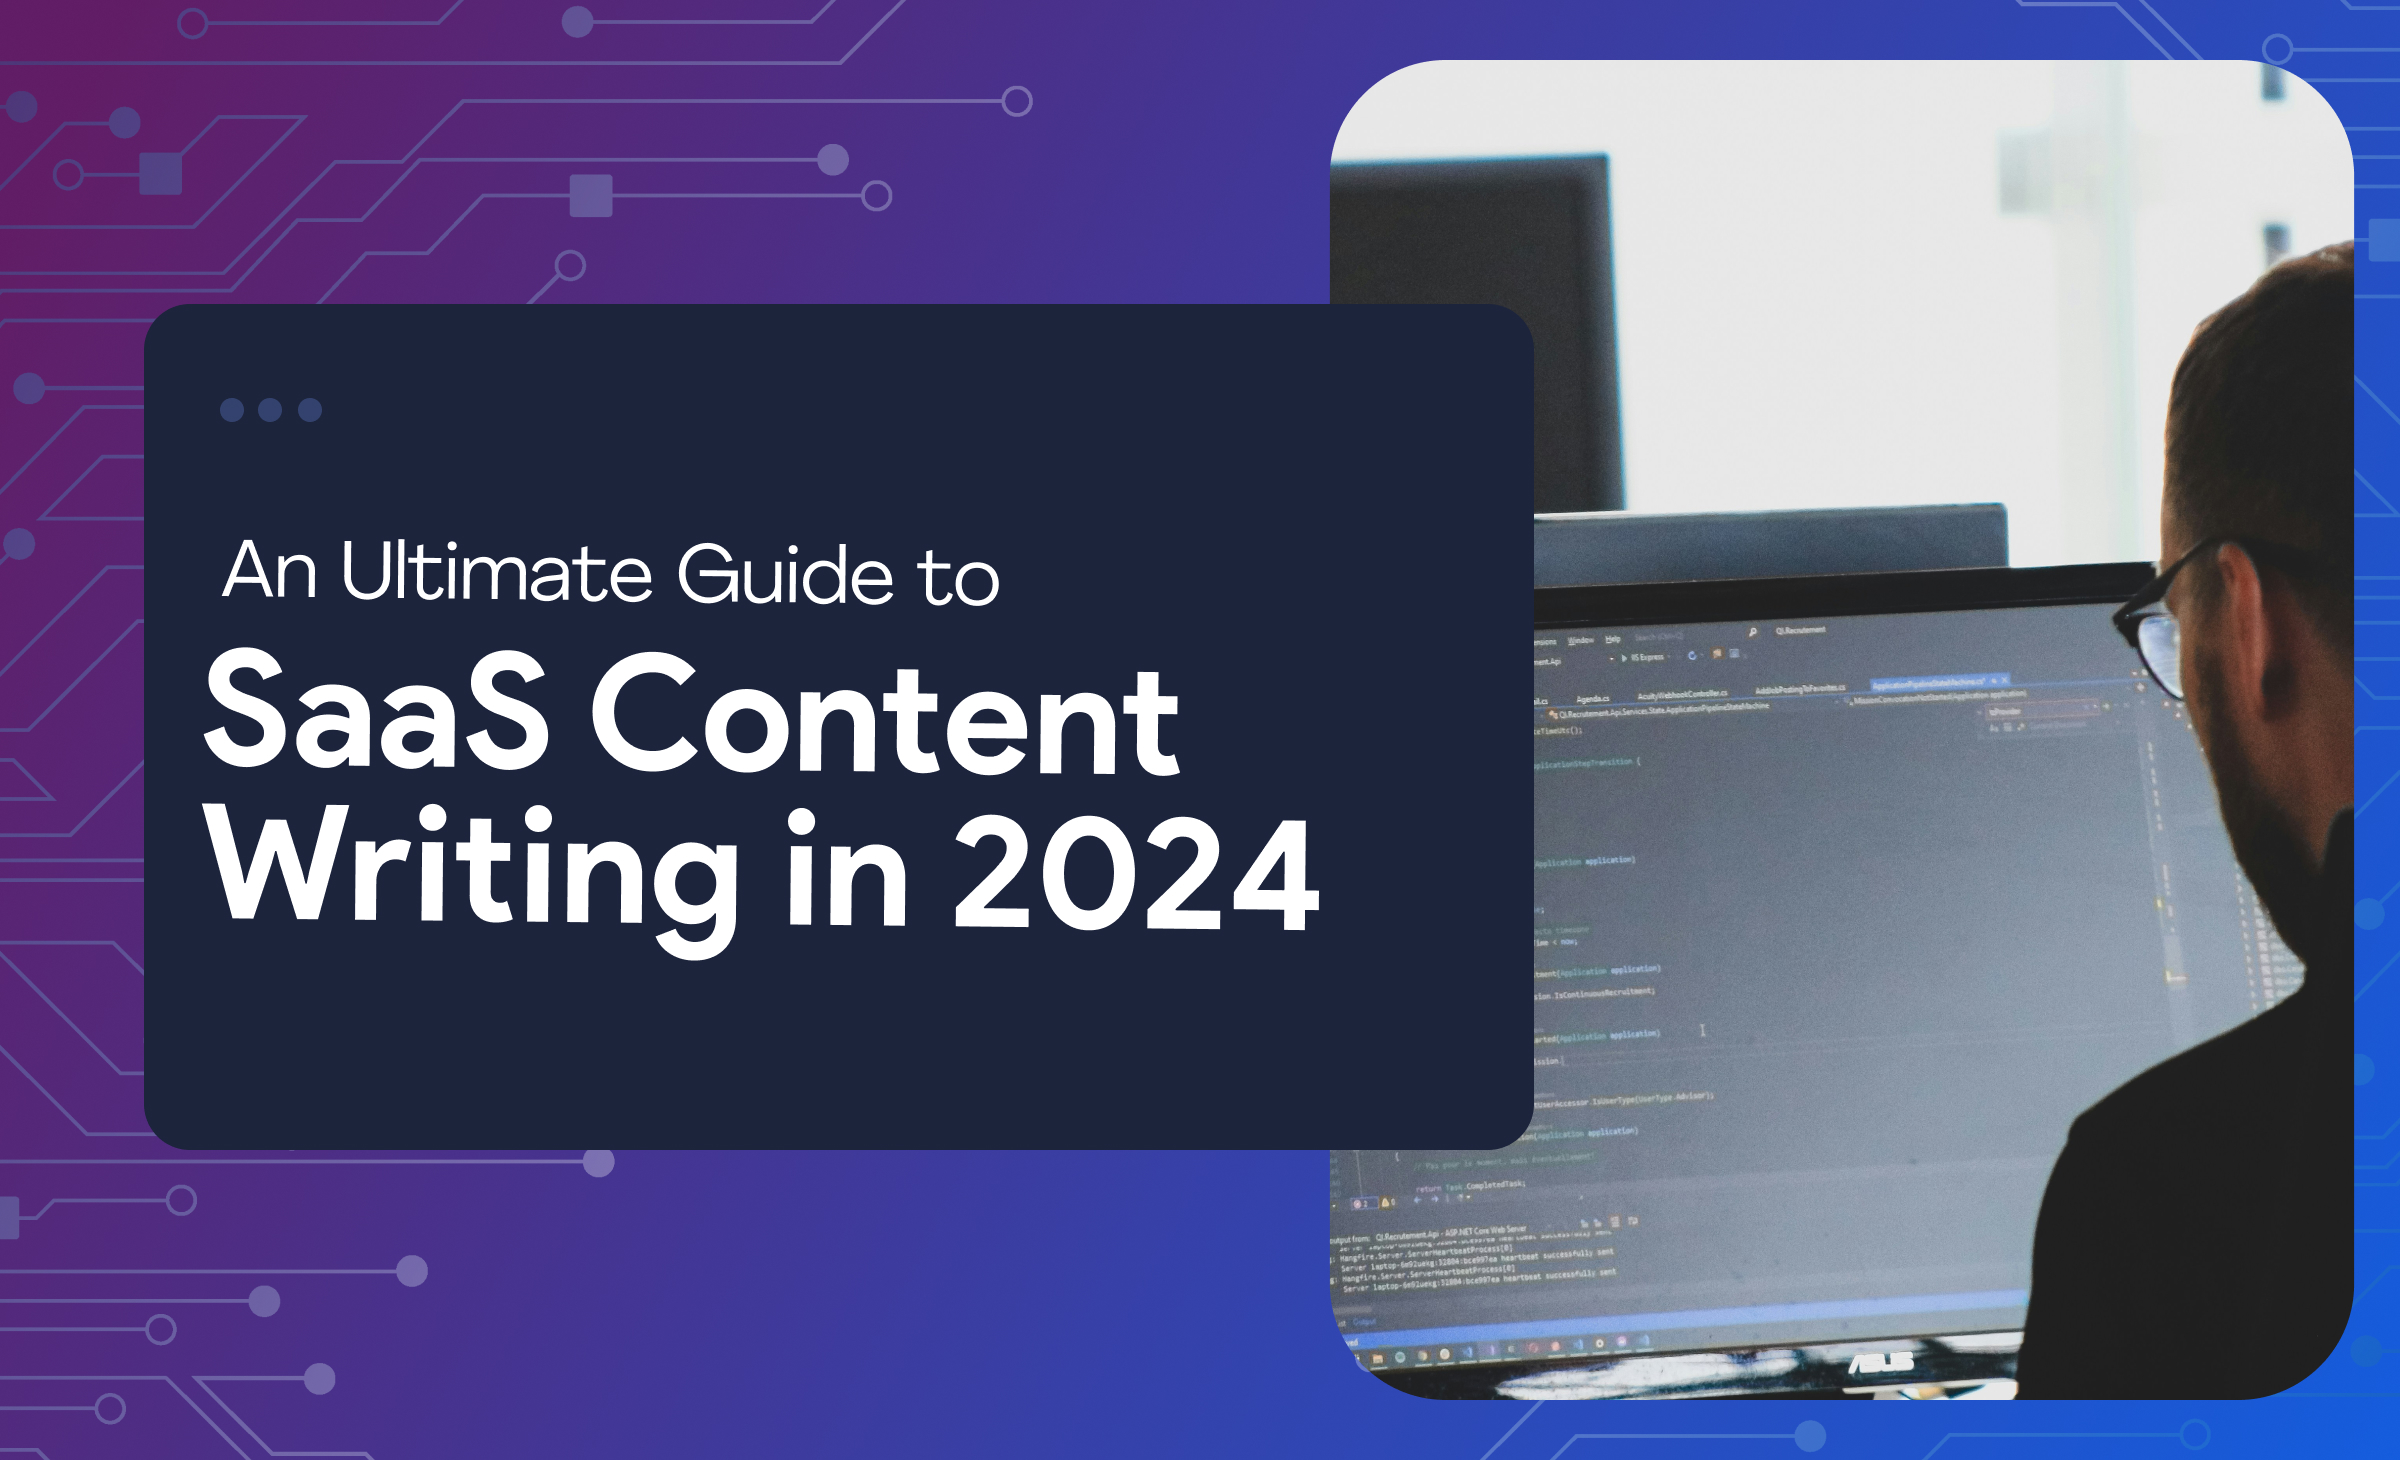 An Ultimate Guide to SaaS Content Writing in 2024